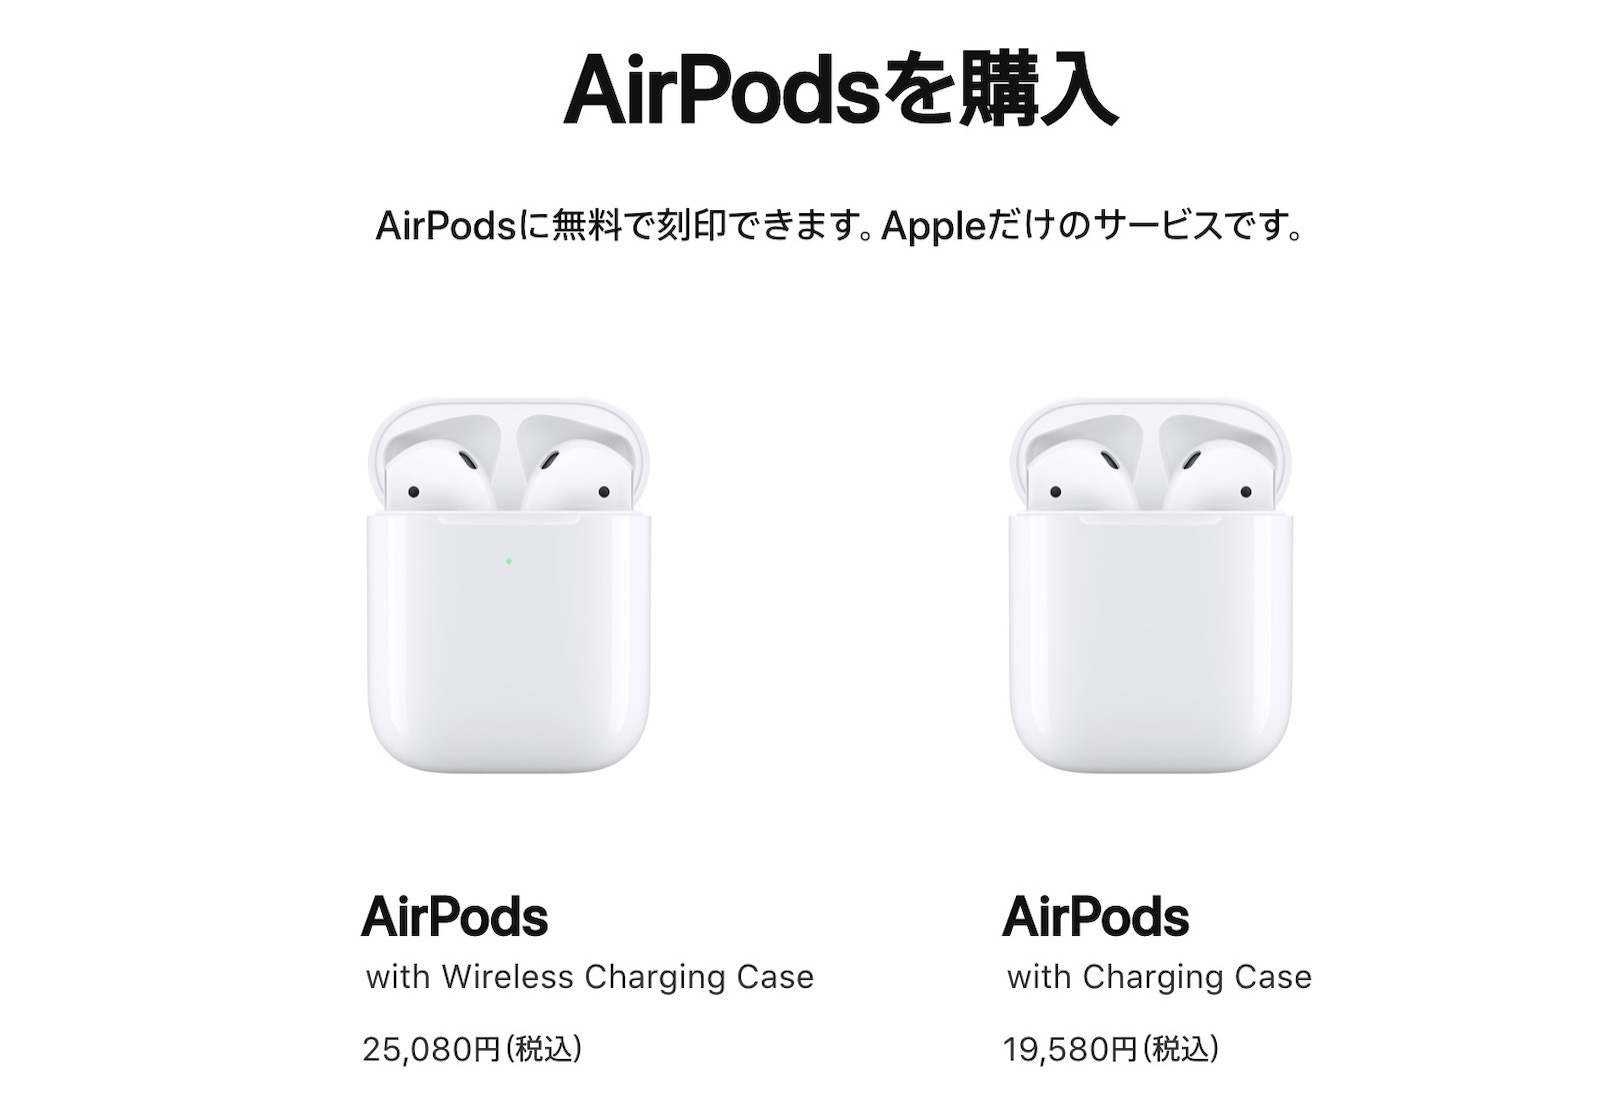 AirPods buy page